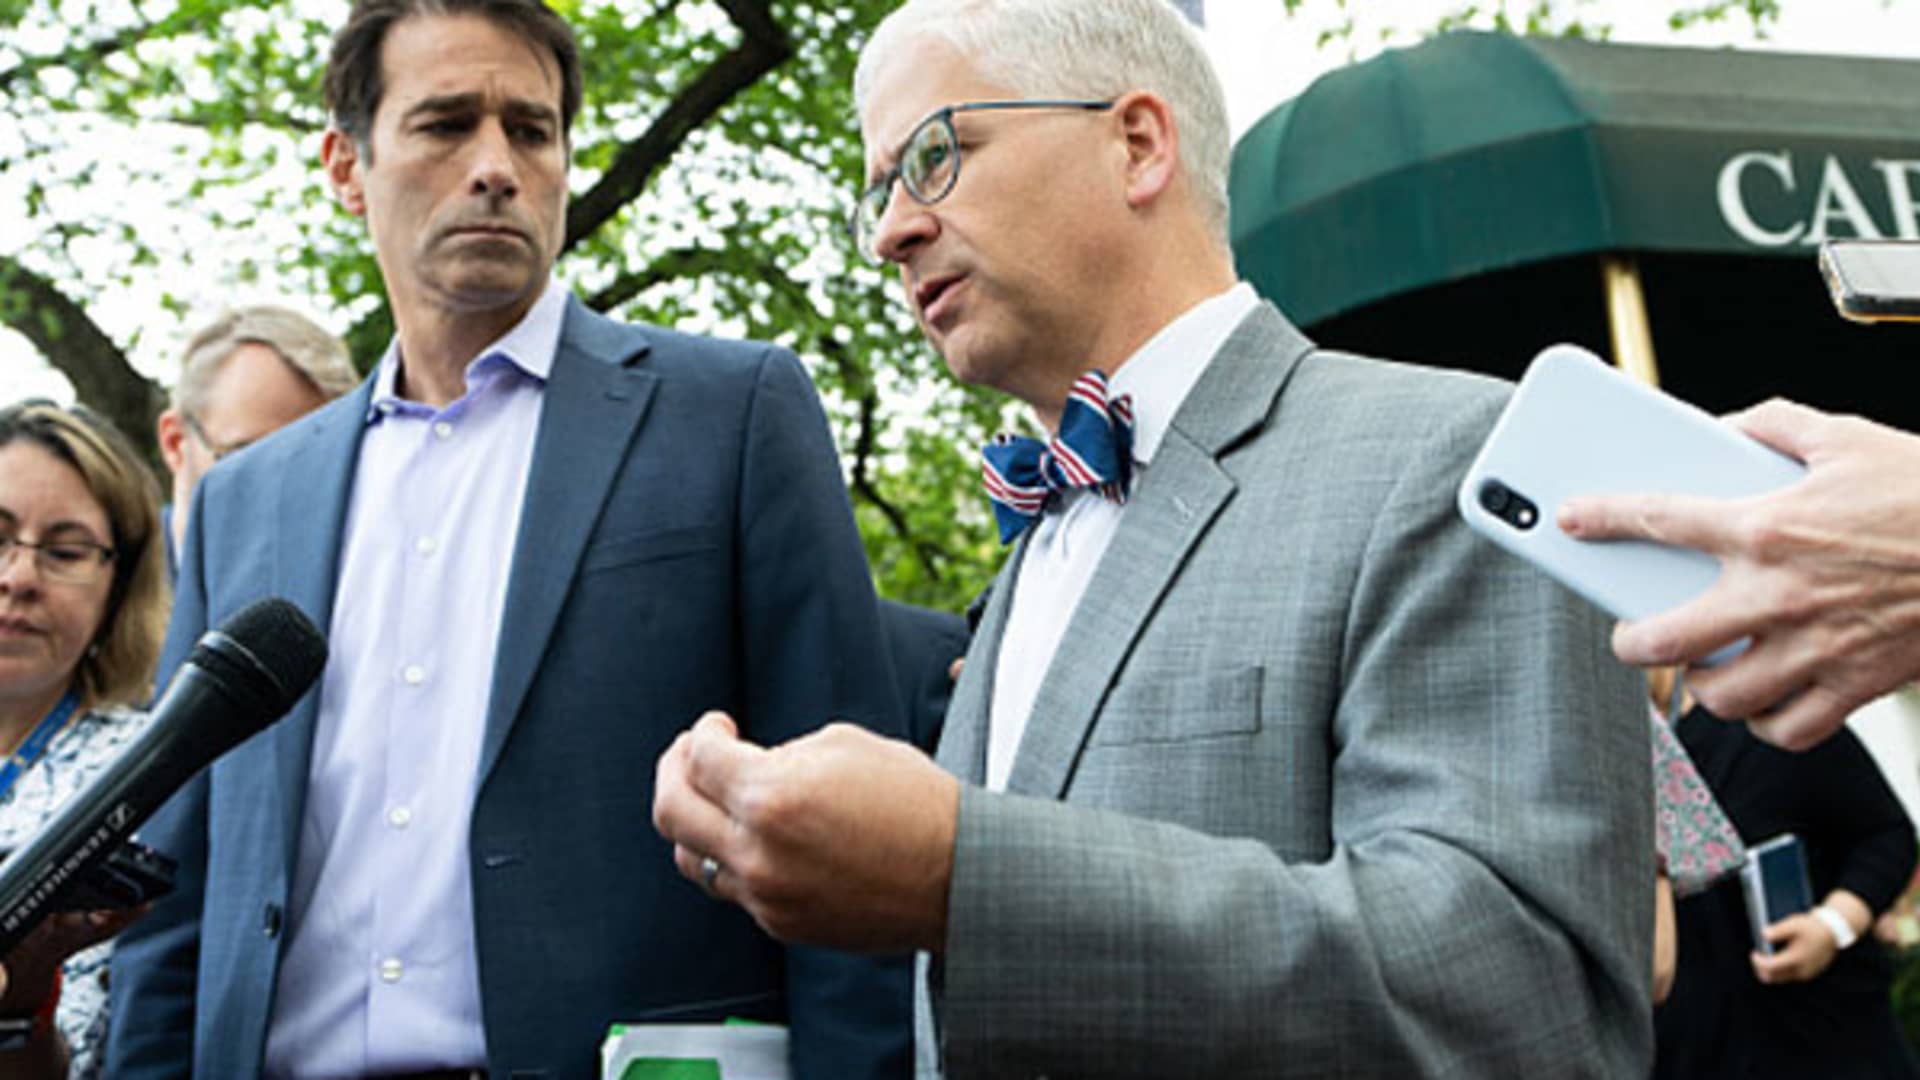 Rep. Garret Graves, R-La., left, and Rep. Patrick McHenry, R-N.C., speak to reporters about debit cieling negotiations as they leave the House Republicans' caucus meeting at the Capitol Hill Club in Washington on Tuesday, May 23, 2023.